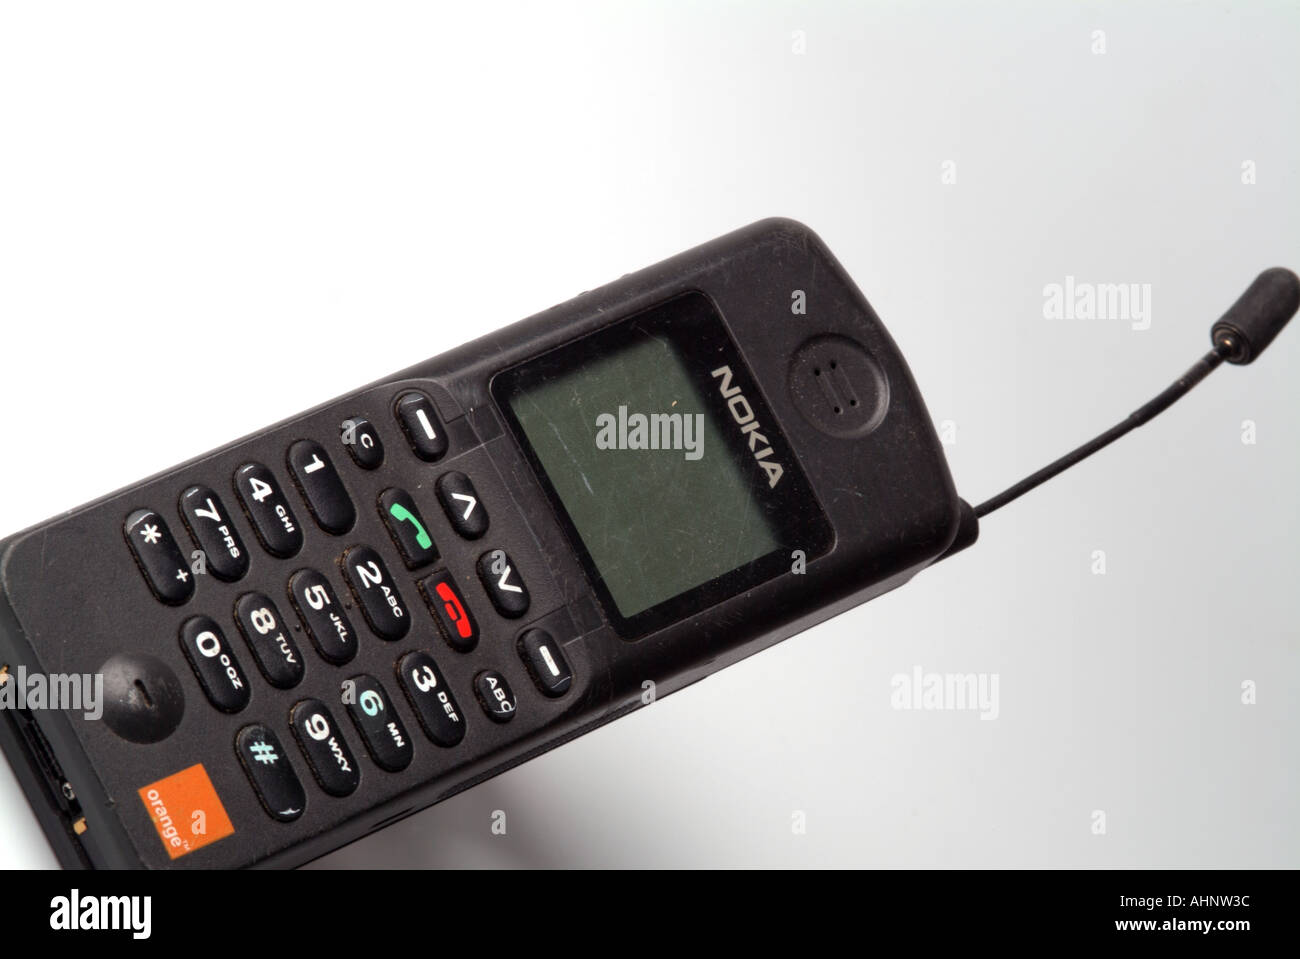 Old Nokia Cell Phone On Stock Photos & Old Nokia Cell ...